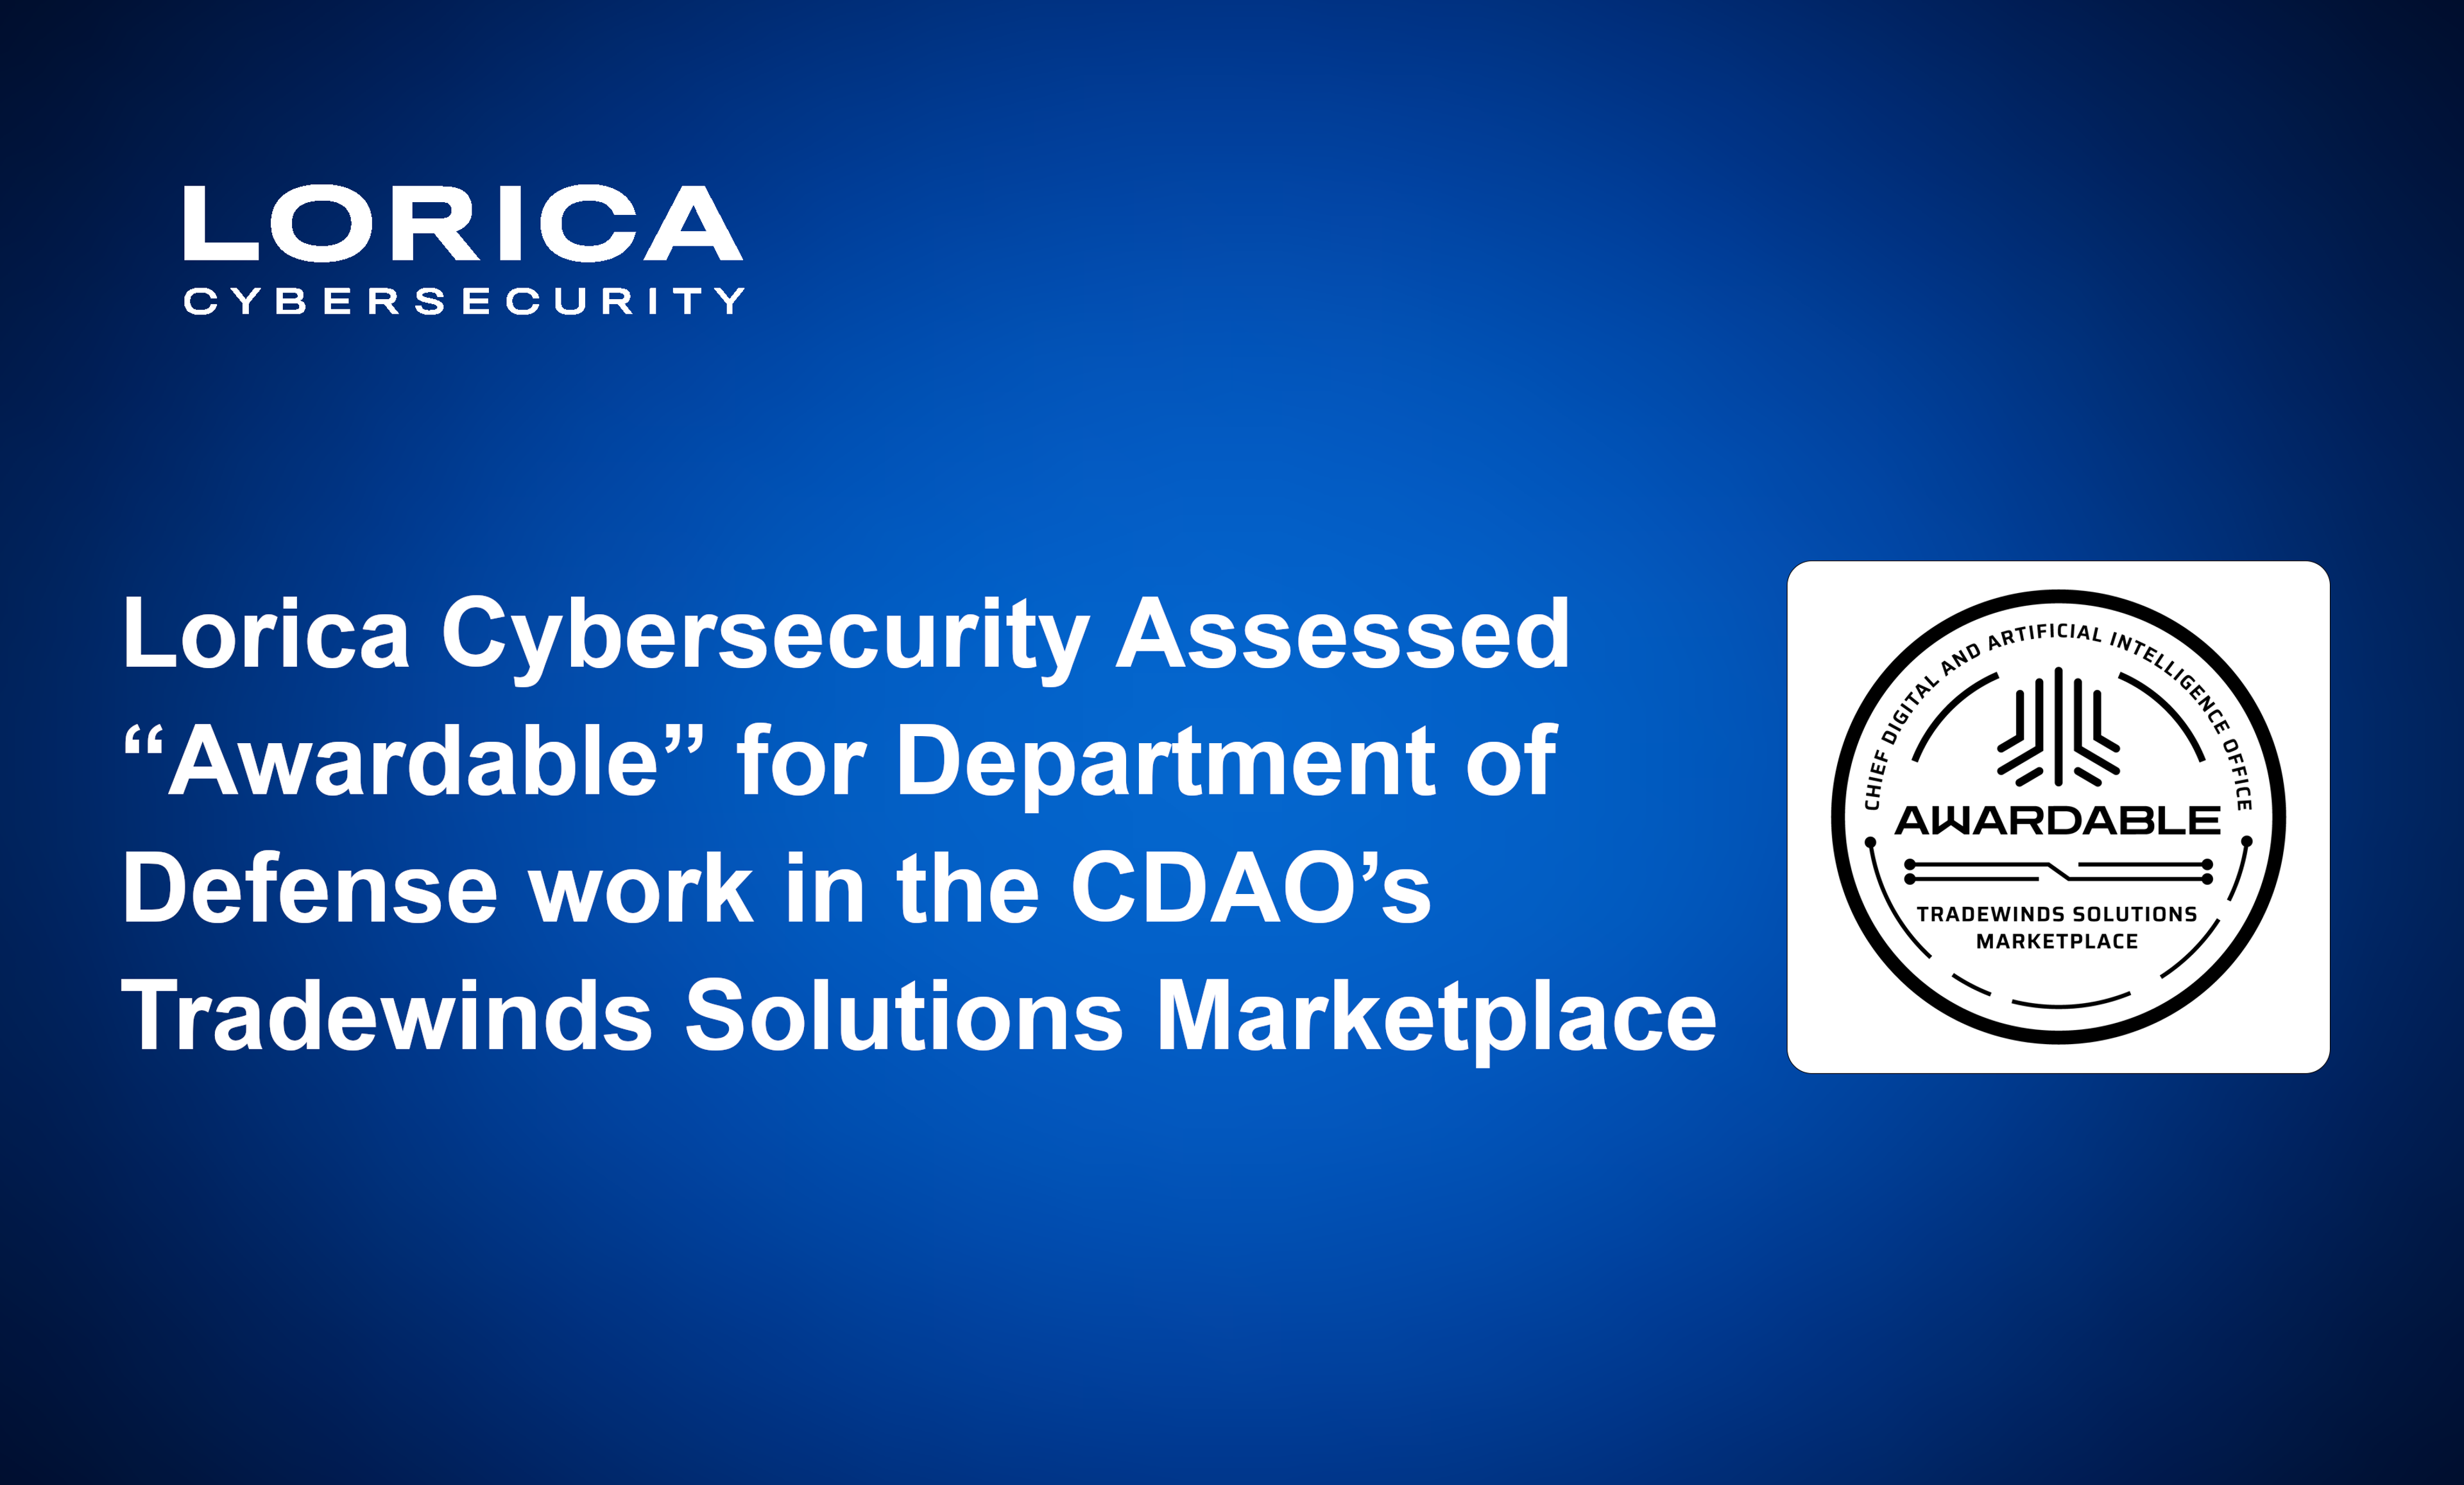 Lorica Cybersecurity Assessed “Awardable” for Department of Defense work in the CDAO’s Tradewinds Solutions Marketplace